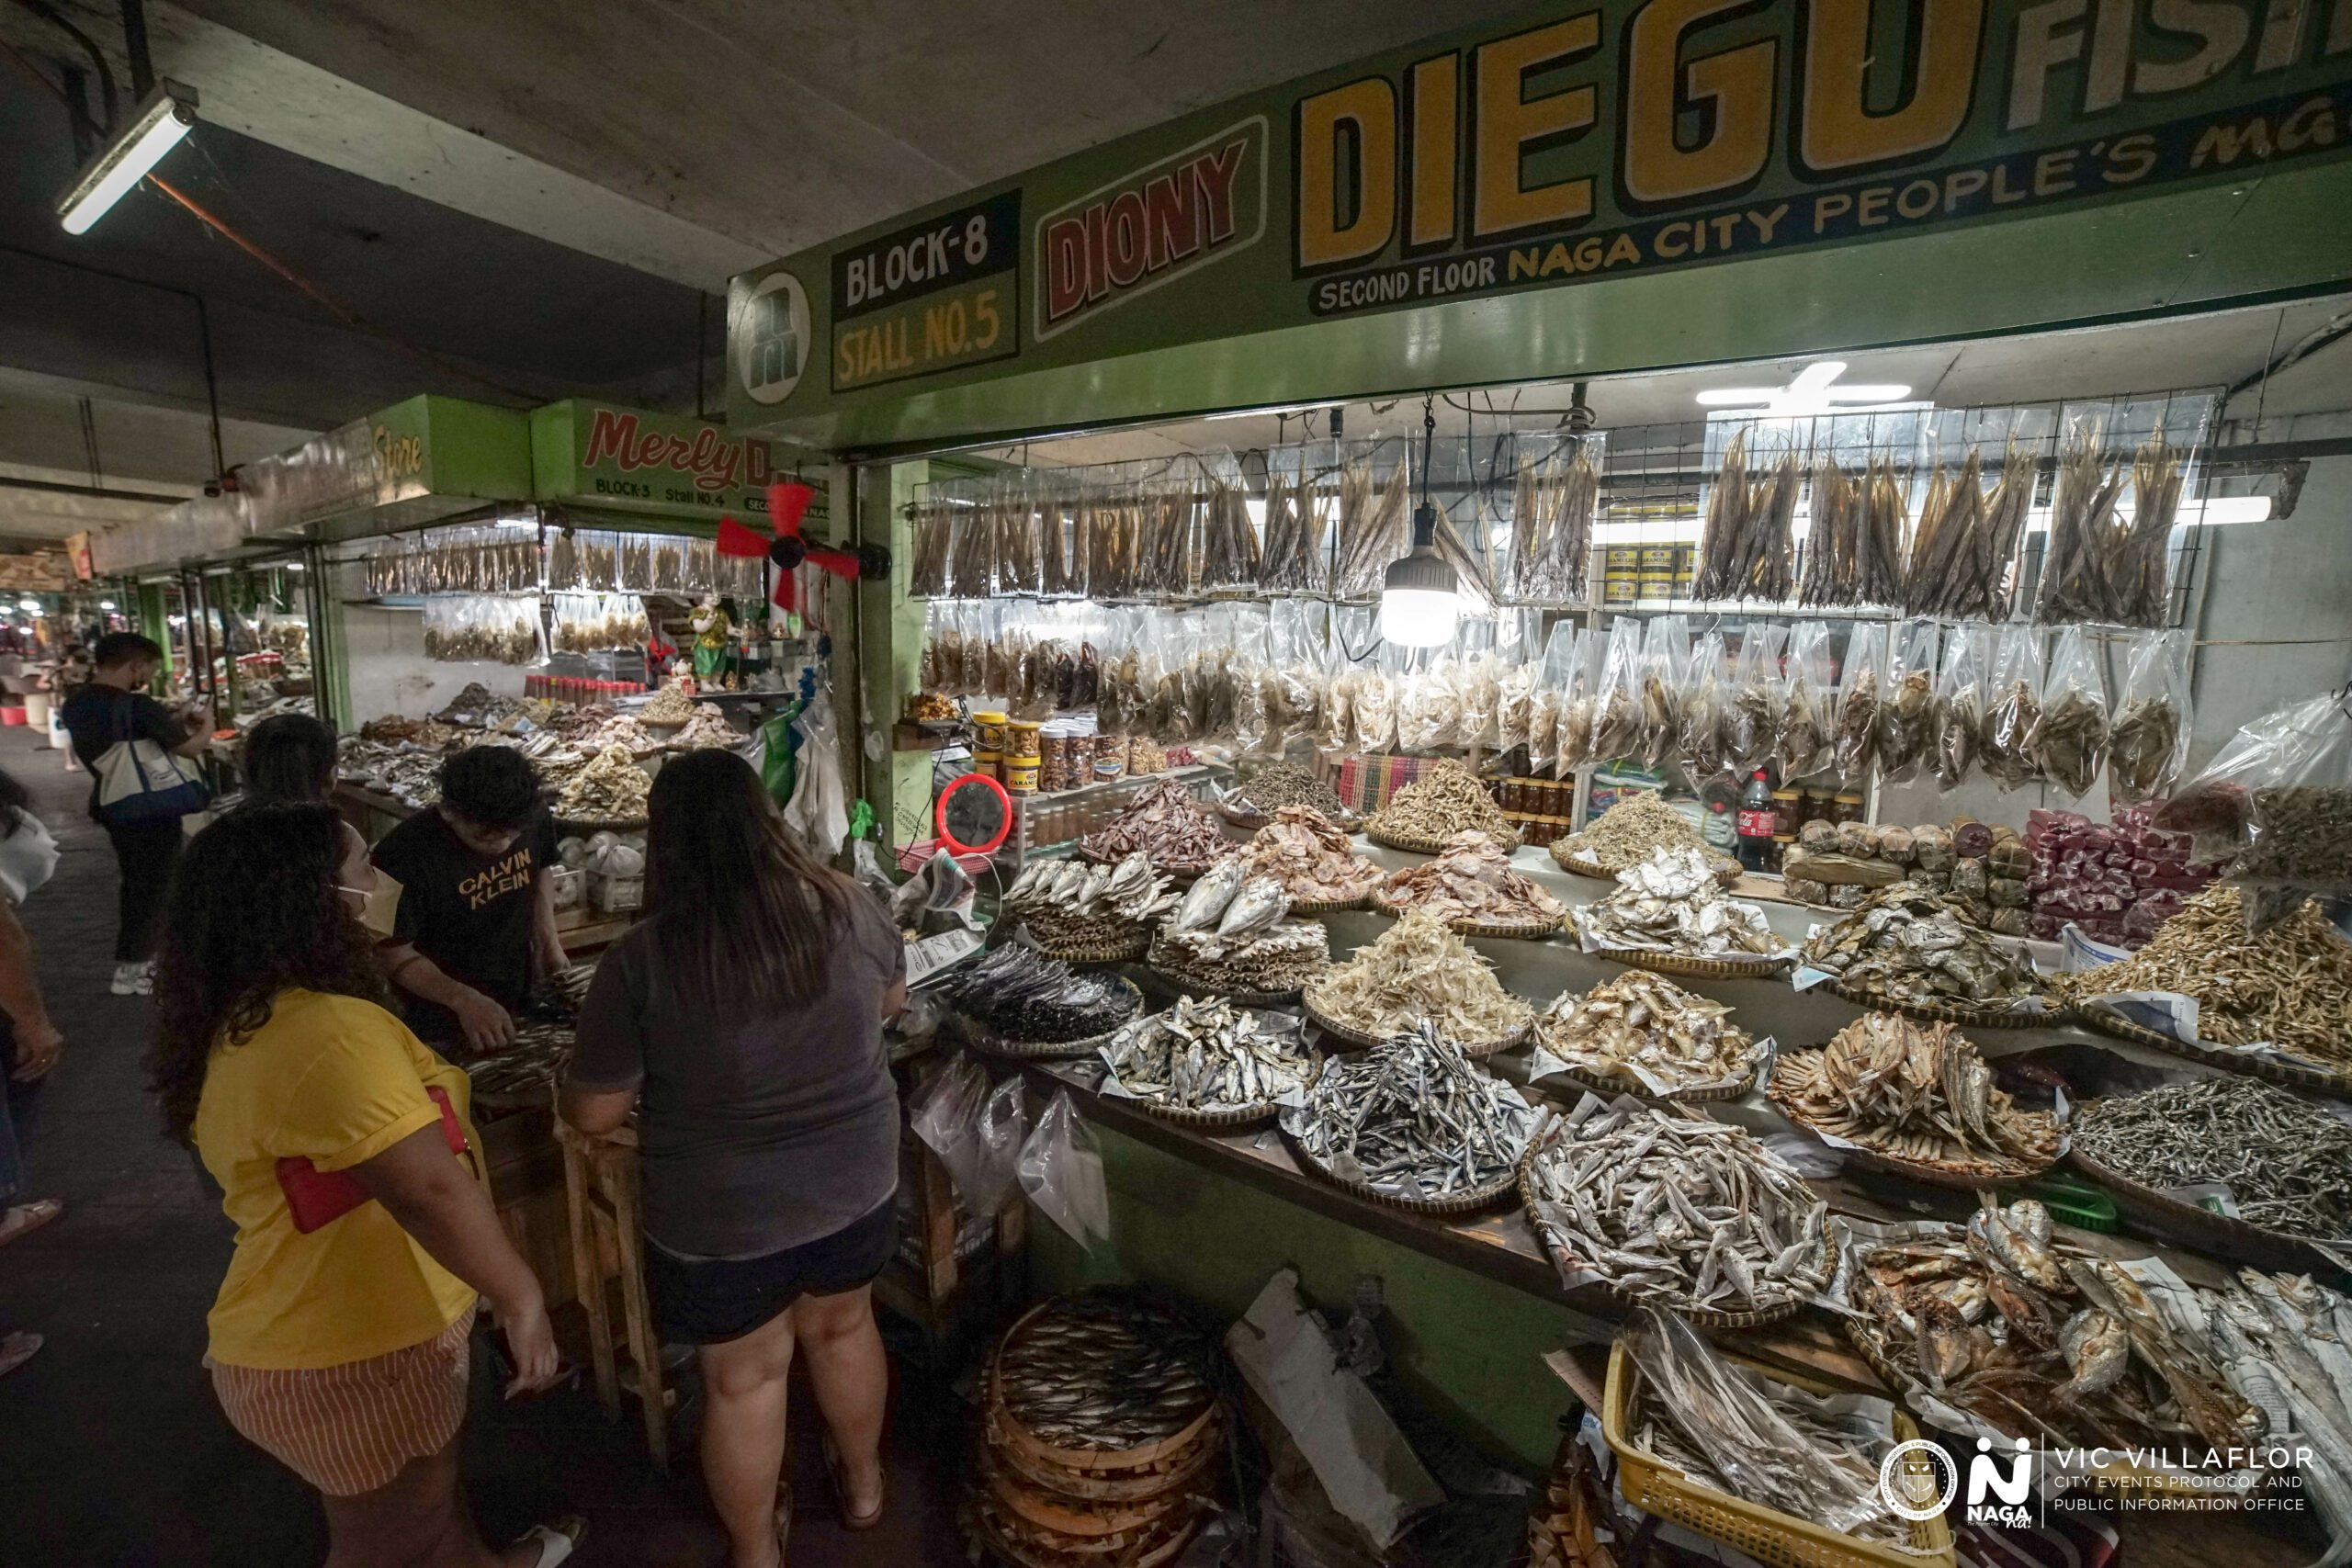 Various storefronts are located at the Dried Fish Section of the Naga City People's Mall